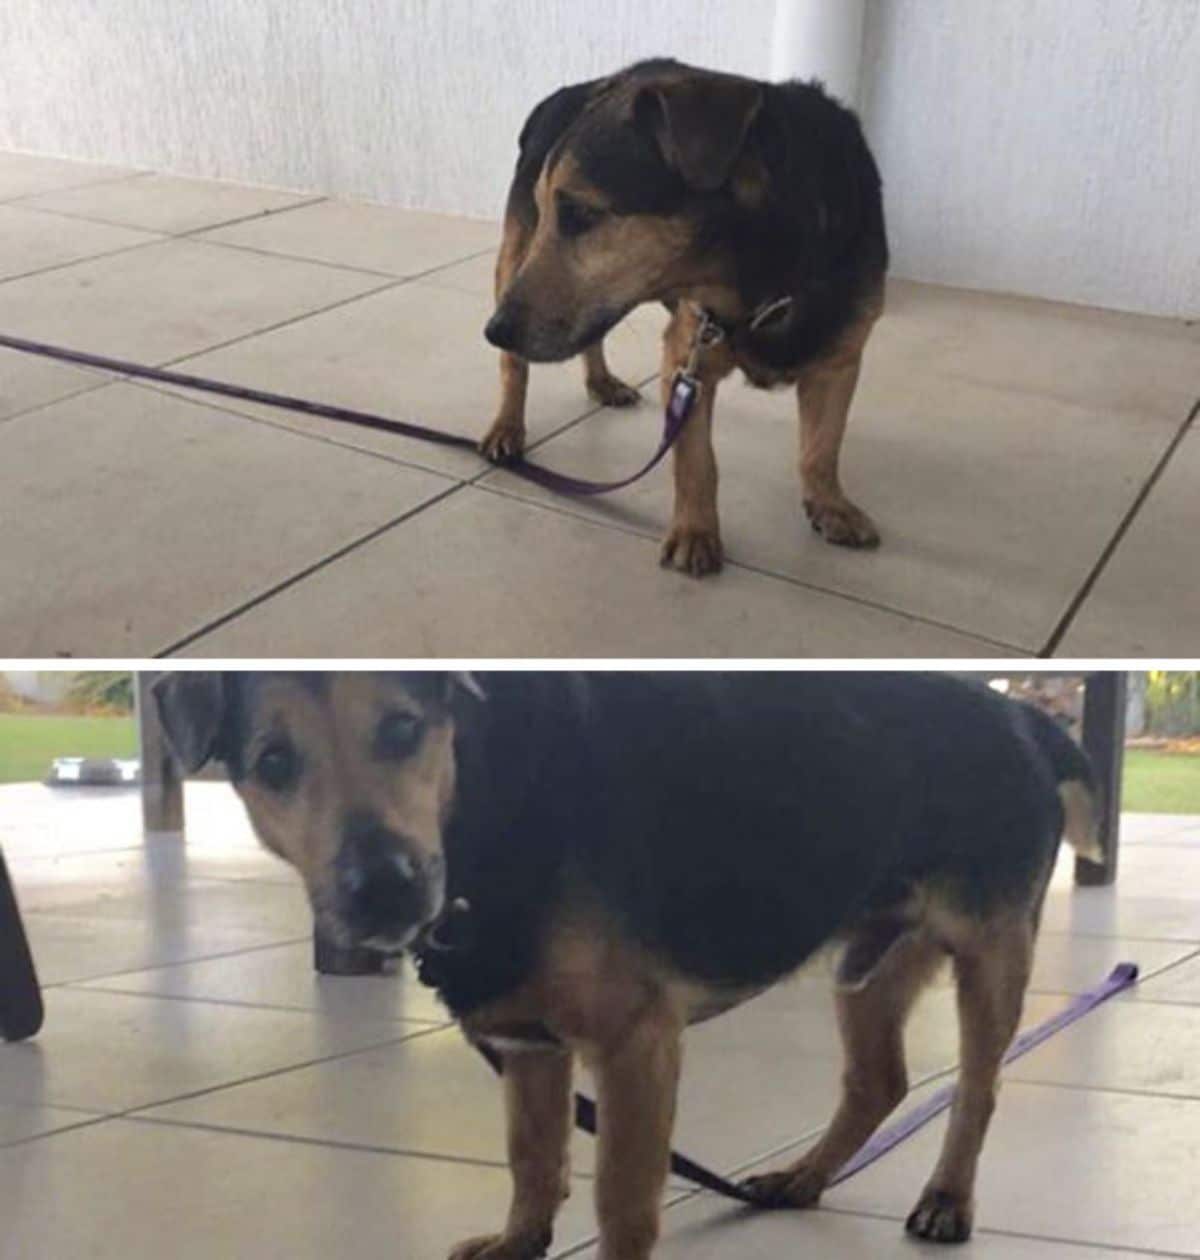 2 photos of a black and brown dog with one foot on its purple leash